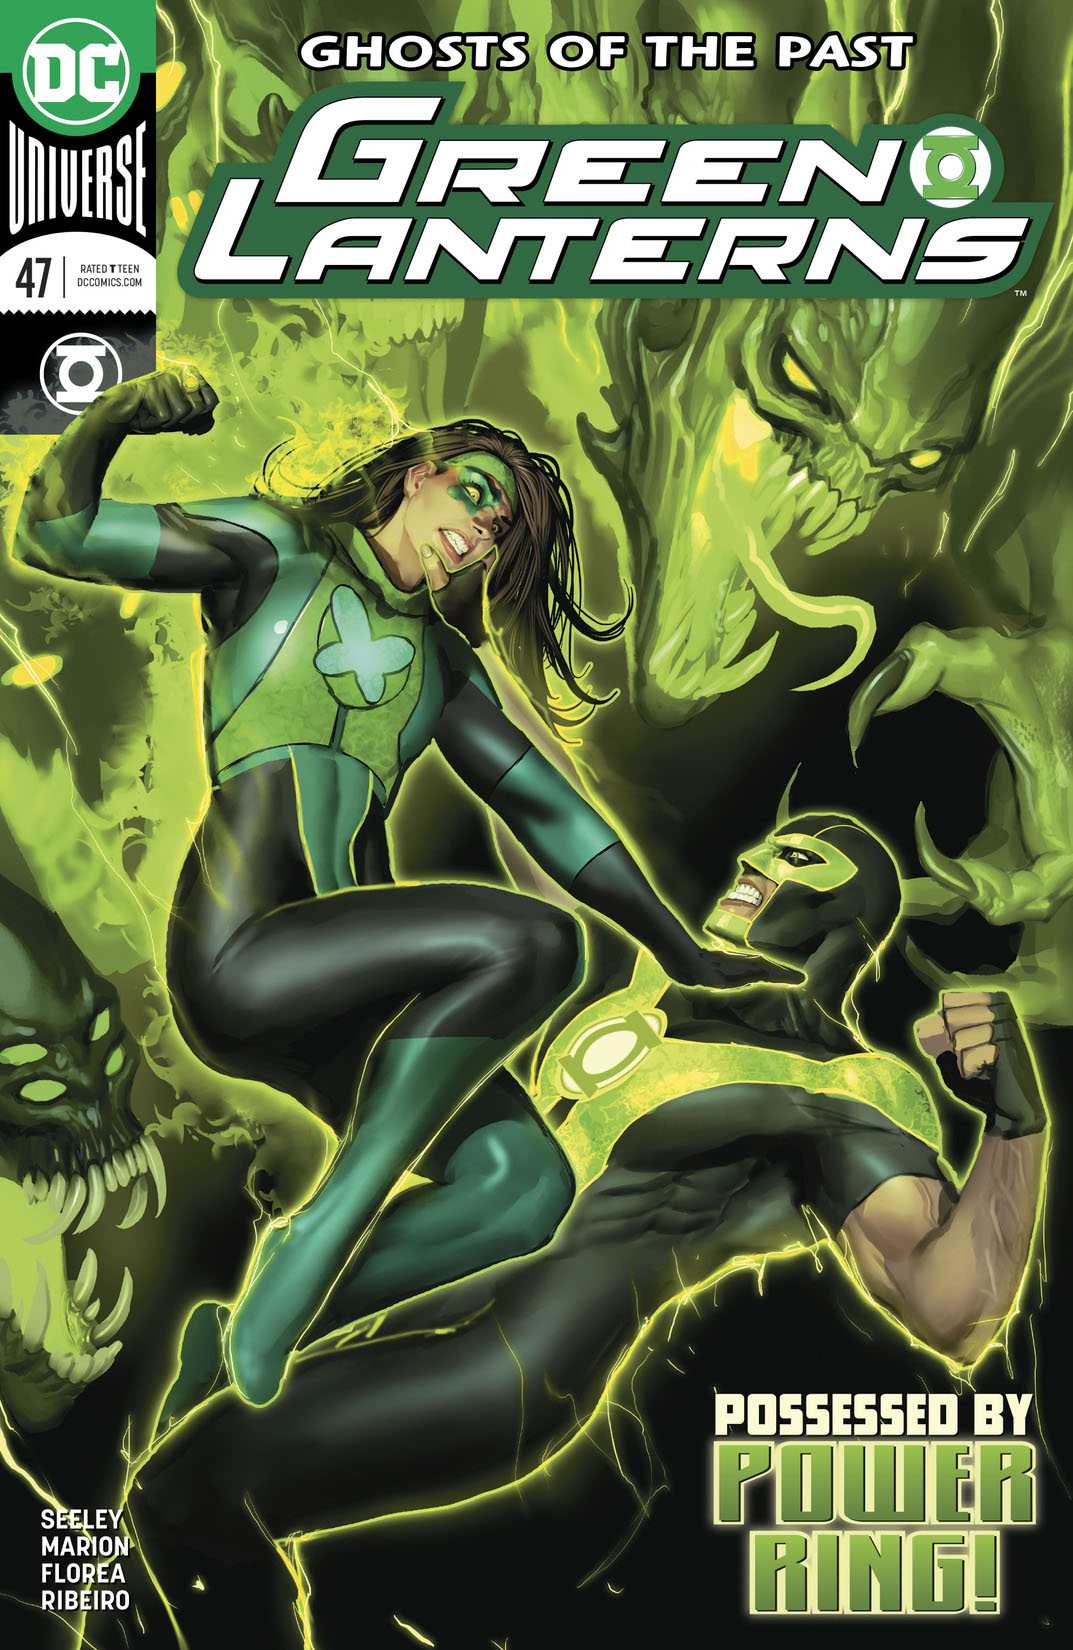 Green Lanterns #47 preview images